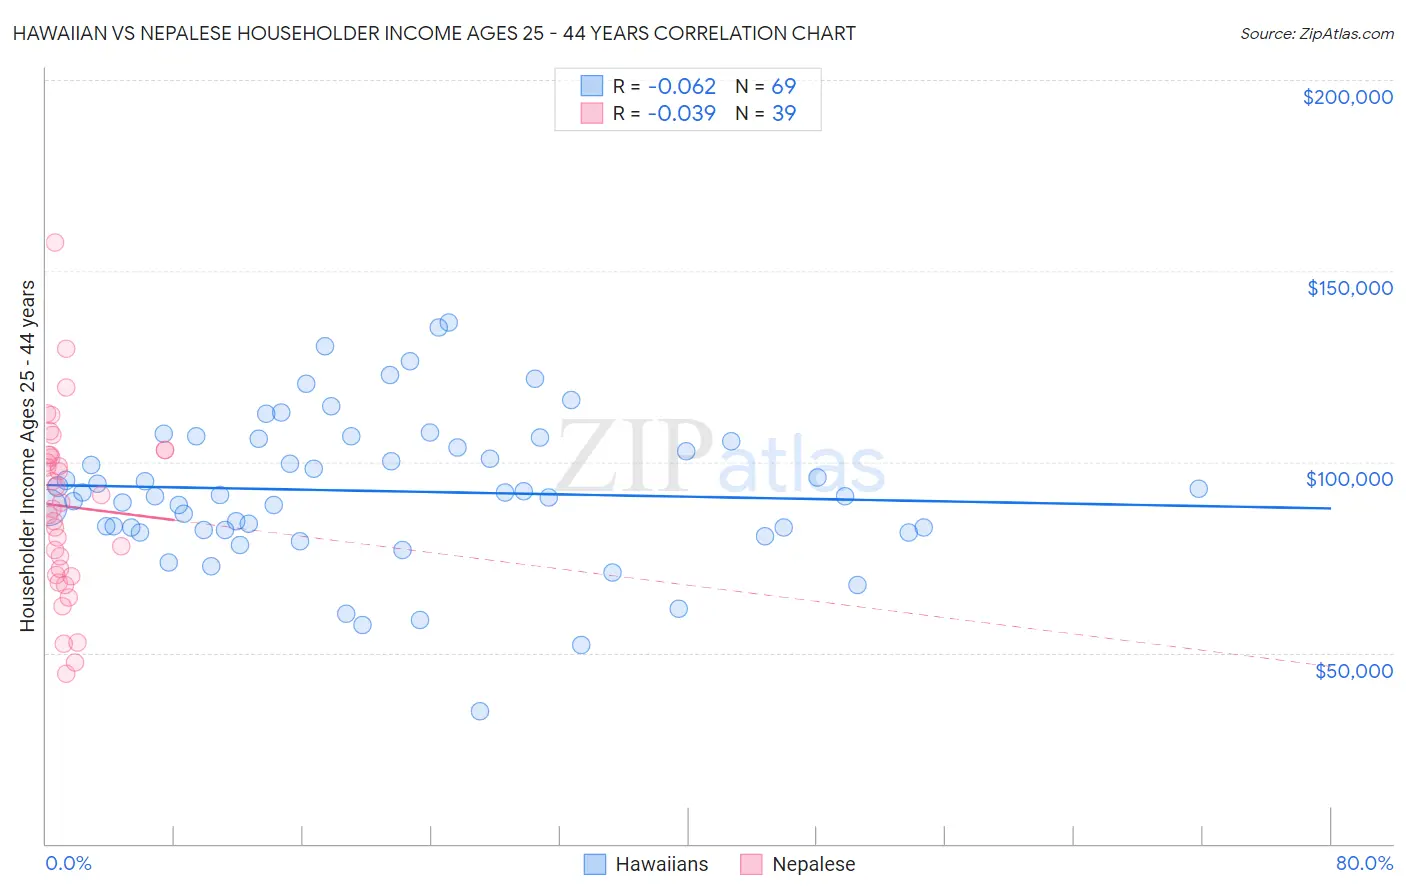 Hawaiian vs Nepalese Householder Income Ages 25 - 44 years